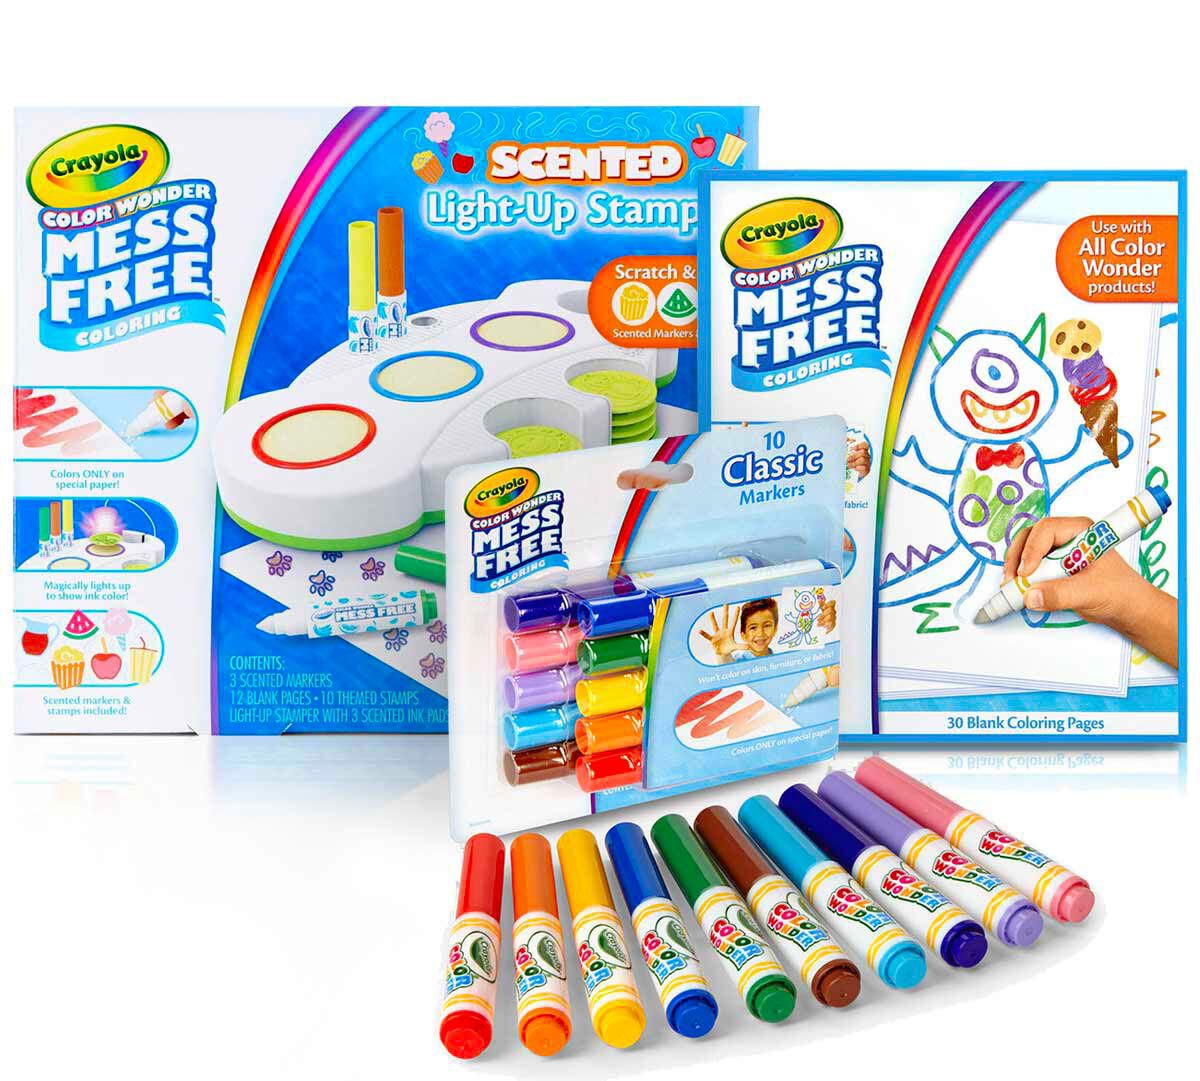 Mess Free Coloring Pages & Markers 20+ Pieces Toddler Stocking Stuffers Crayola Color Wonder Mess Free Art Desk with Stamps Kids Toys & Paw Patrol Color Wonder 